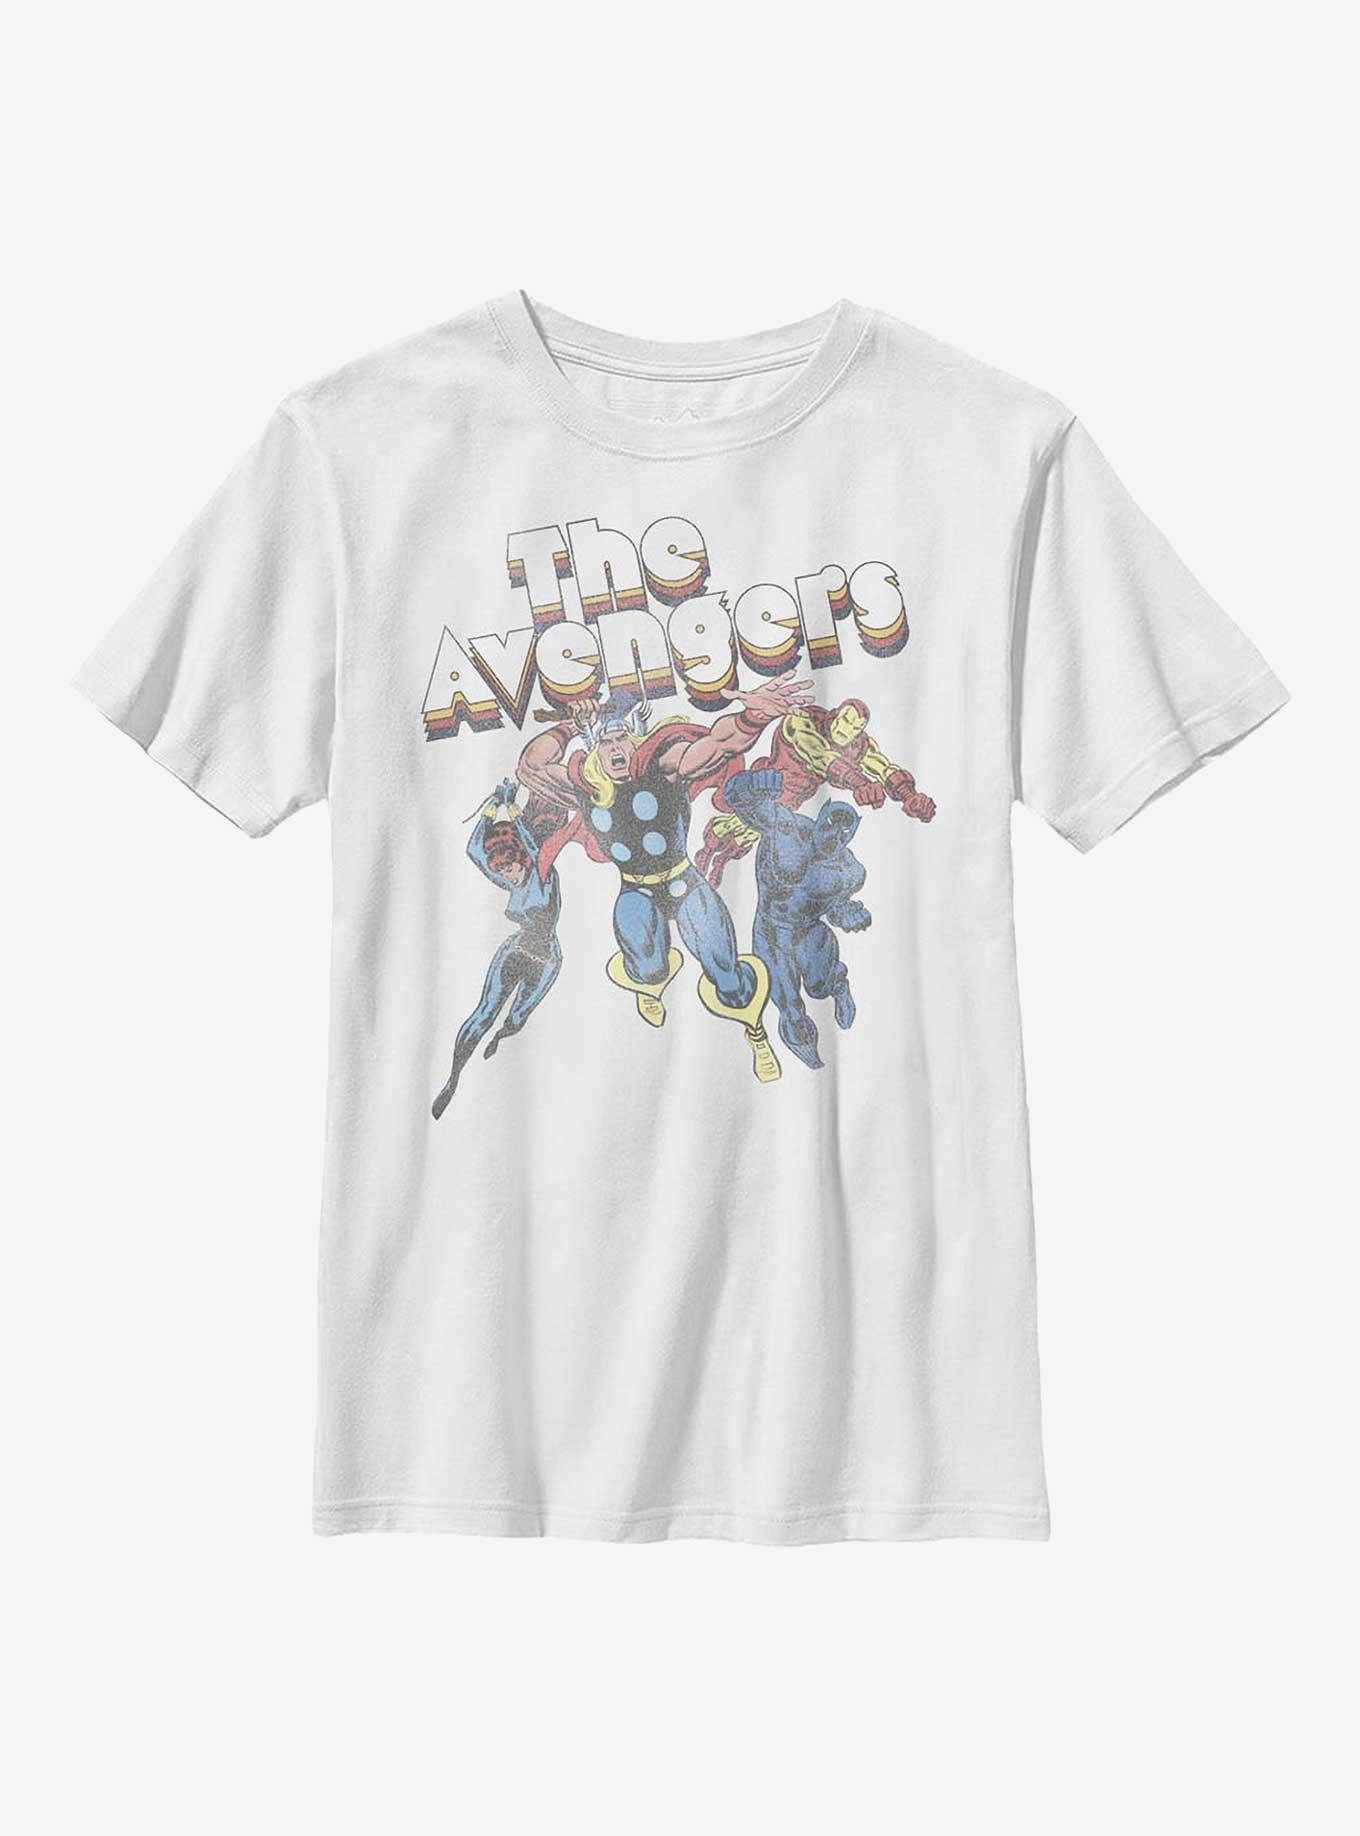 Marvel Avengers Attack Youth T-Shirt, WHITE, hi-res